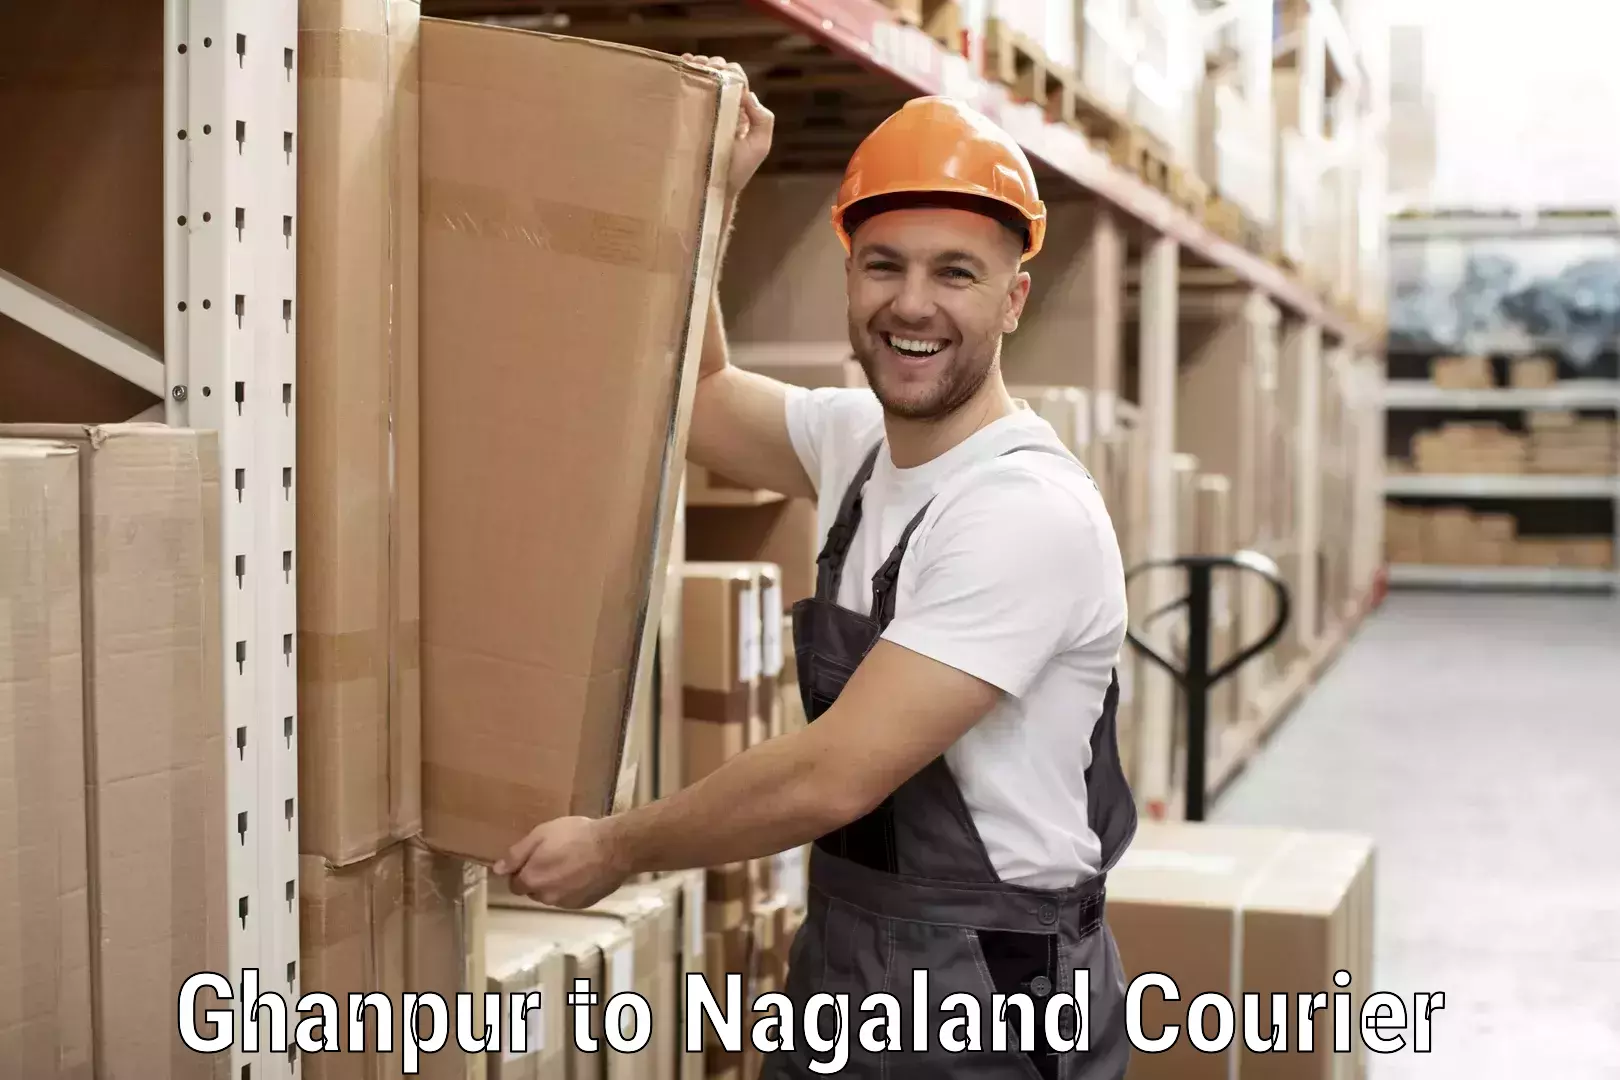 Reliable logistics providers Ghanpur to Nagaland